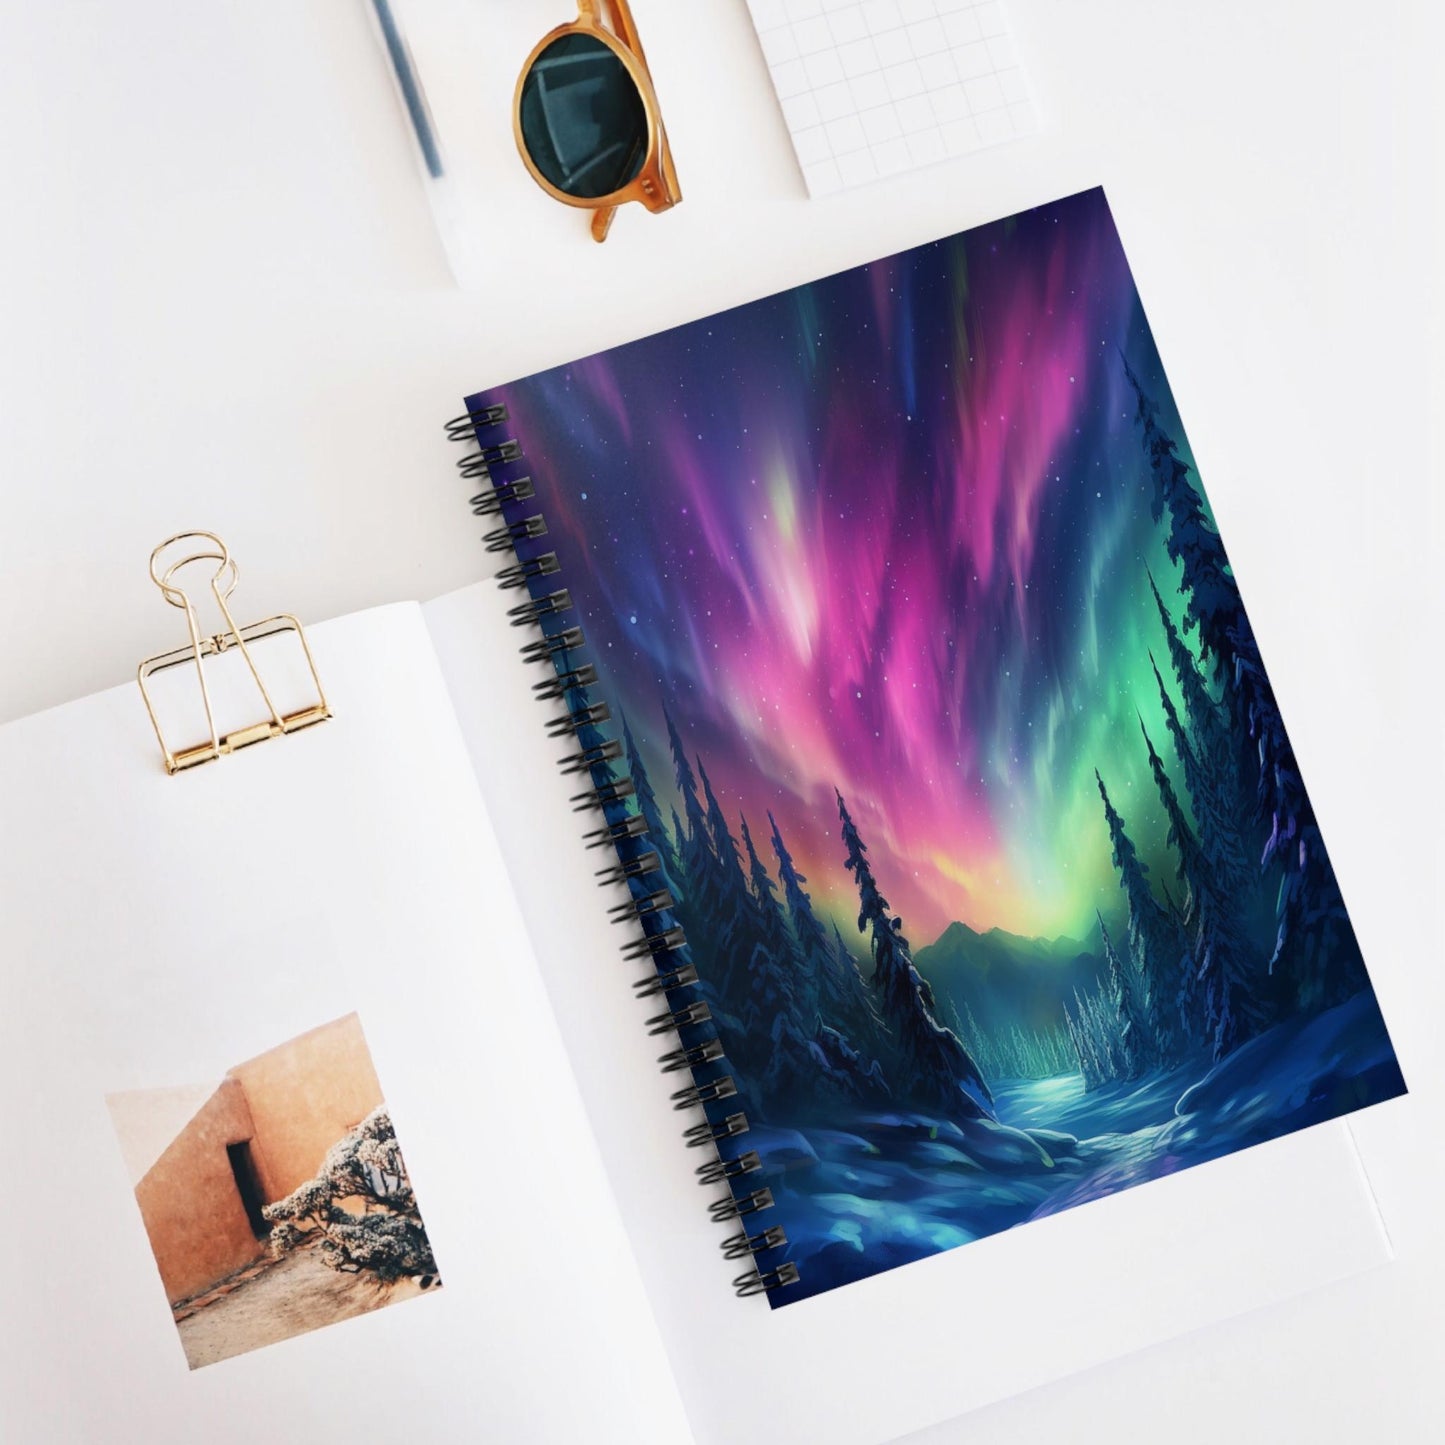 Unique Aurora Borealis Spiral Notebook Ruled Line - Personalized Northern Light View - Stationary Accessories - Perfect Aurora Lovers Gift 35